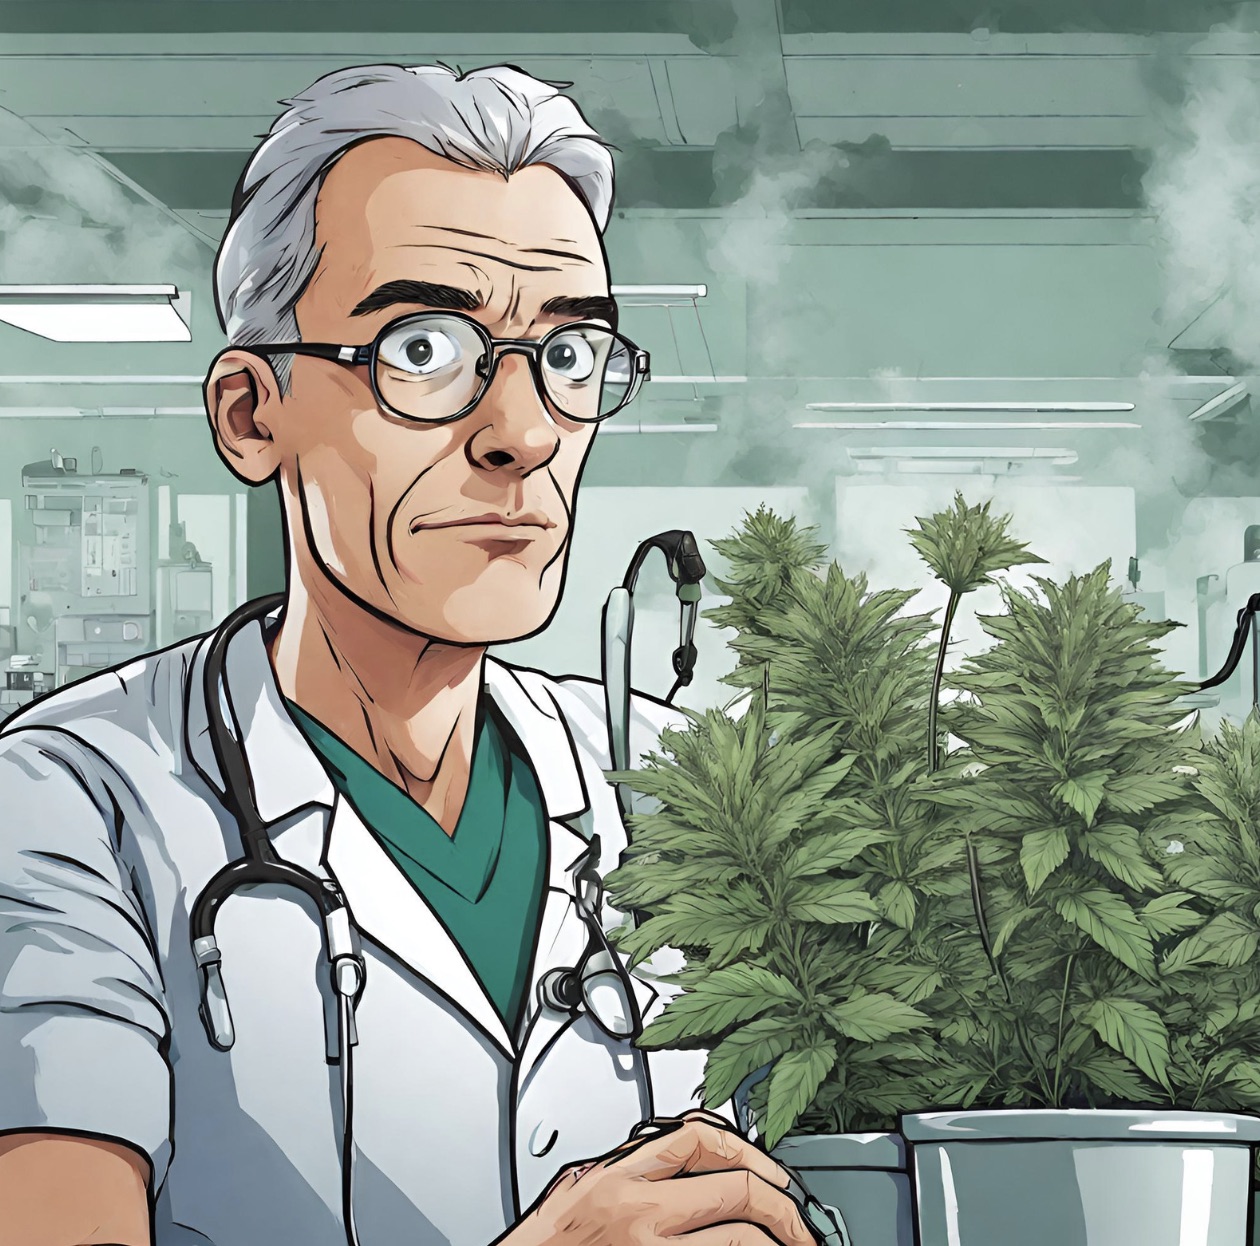 Generalist and specialist doctors contrasting each other in the field of medical cannabis